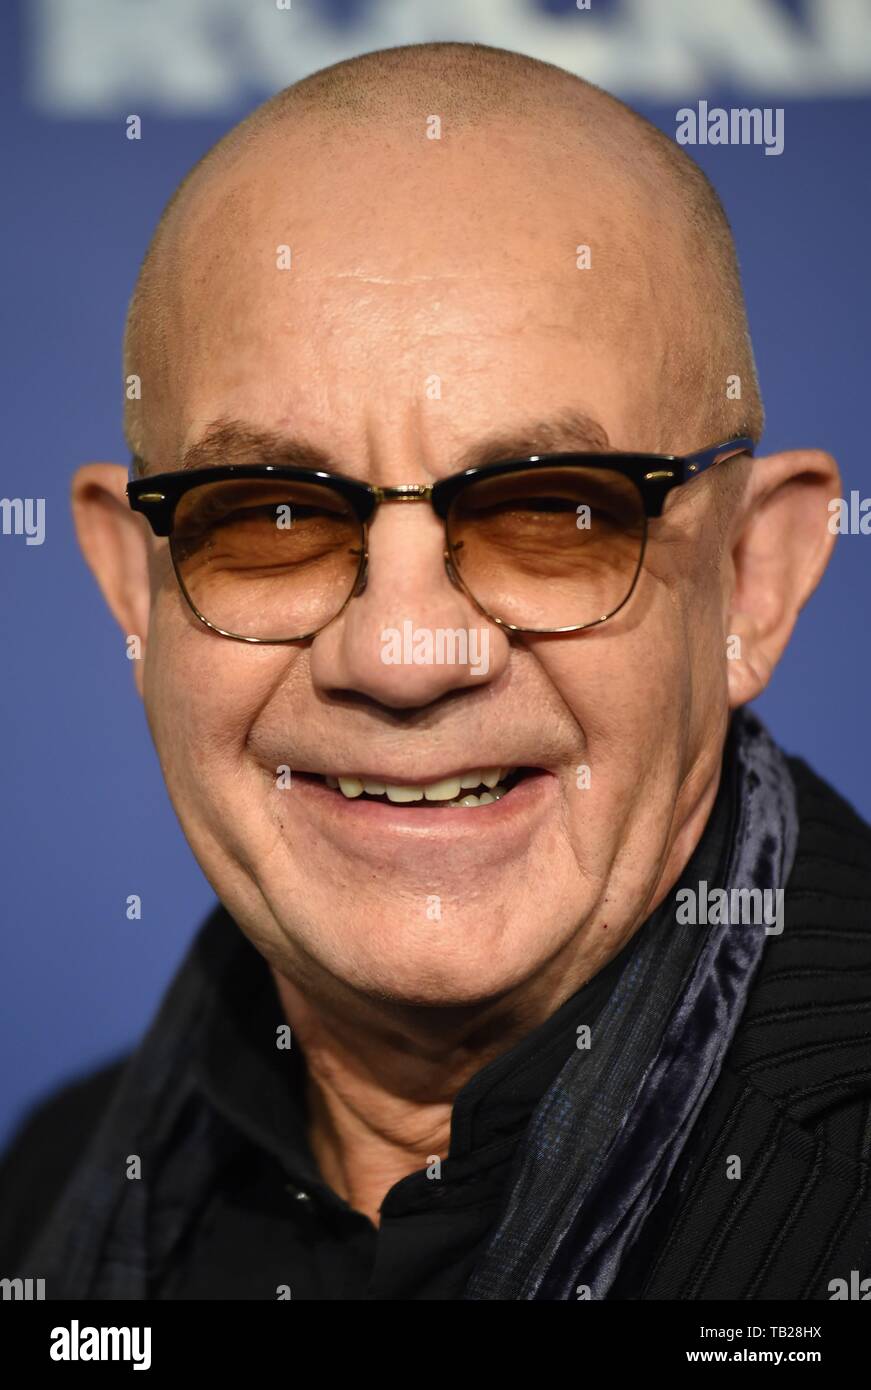 New York, NY, USA. 29 mai, 2019. Bernie Taupin aux arrivées pour ROCKETMAN Premiere, Alice Tully Hall au Lincoln Center, New York, NY 29 mai 2019. Credit : Kristin Callahan/Everett Collection/Alamy Live News Banque D'Images